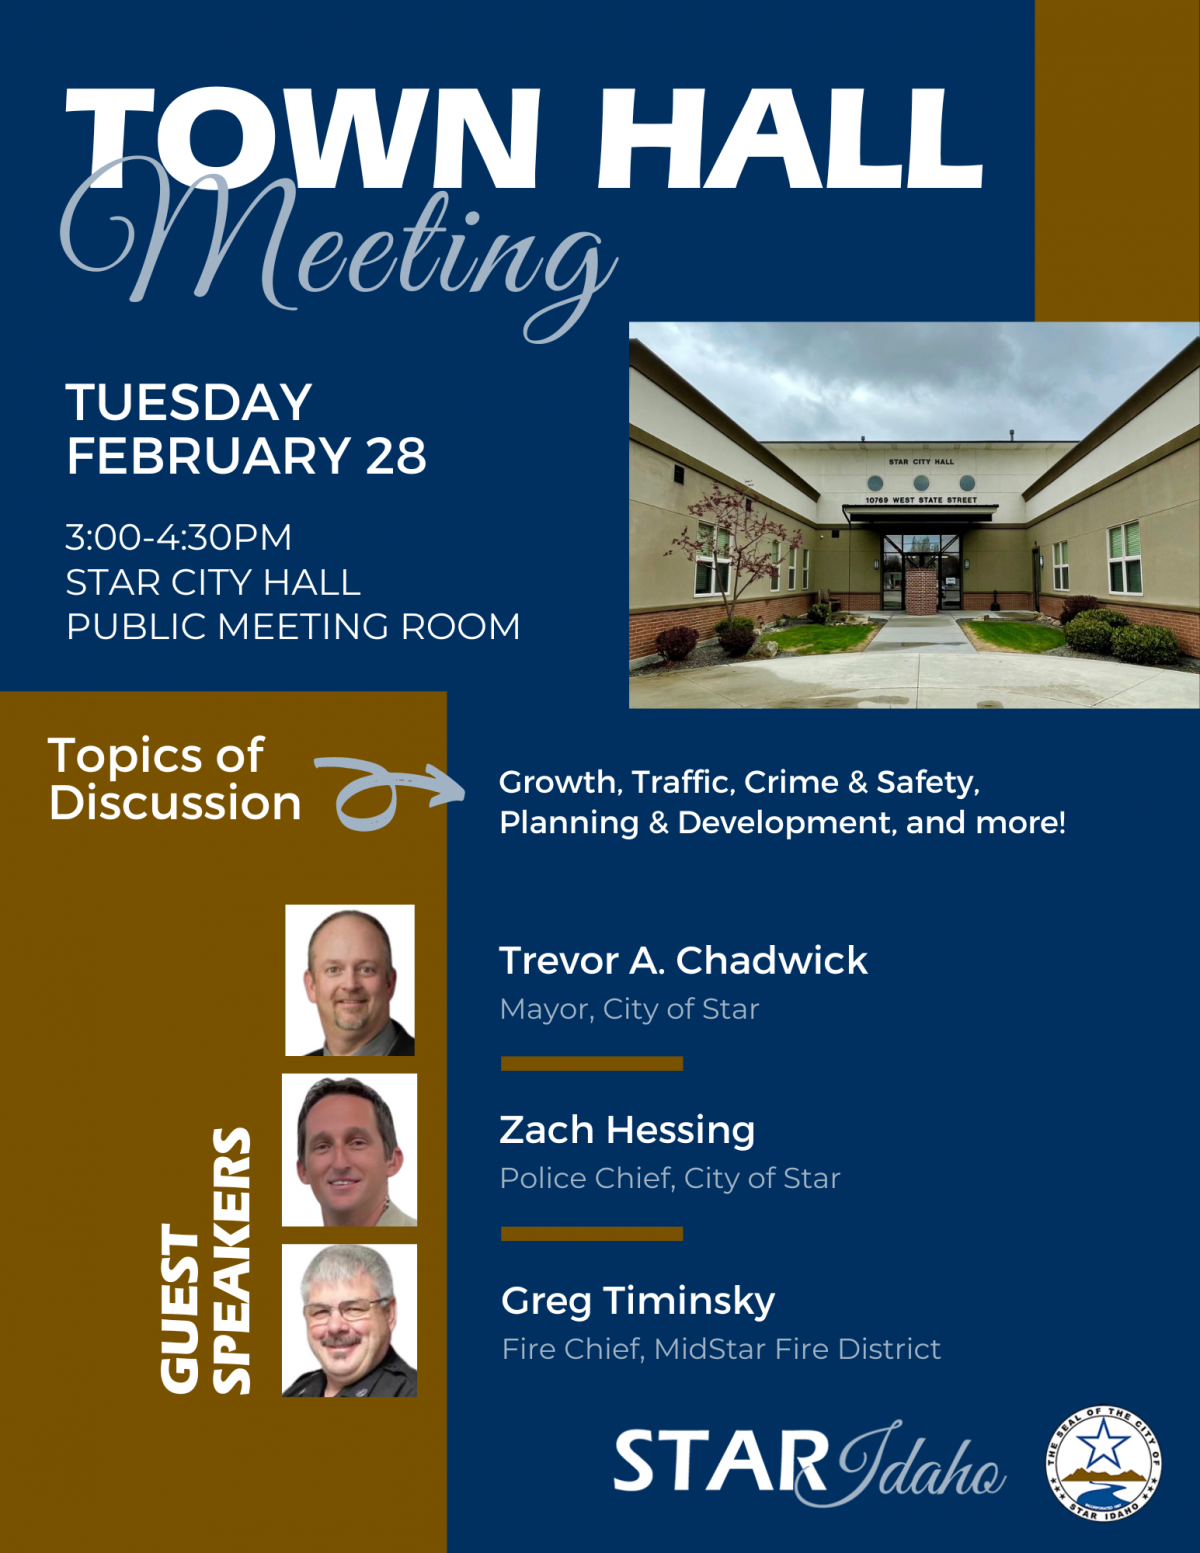 Town Hall Meeting Details